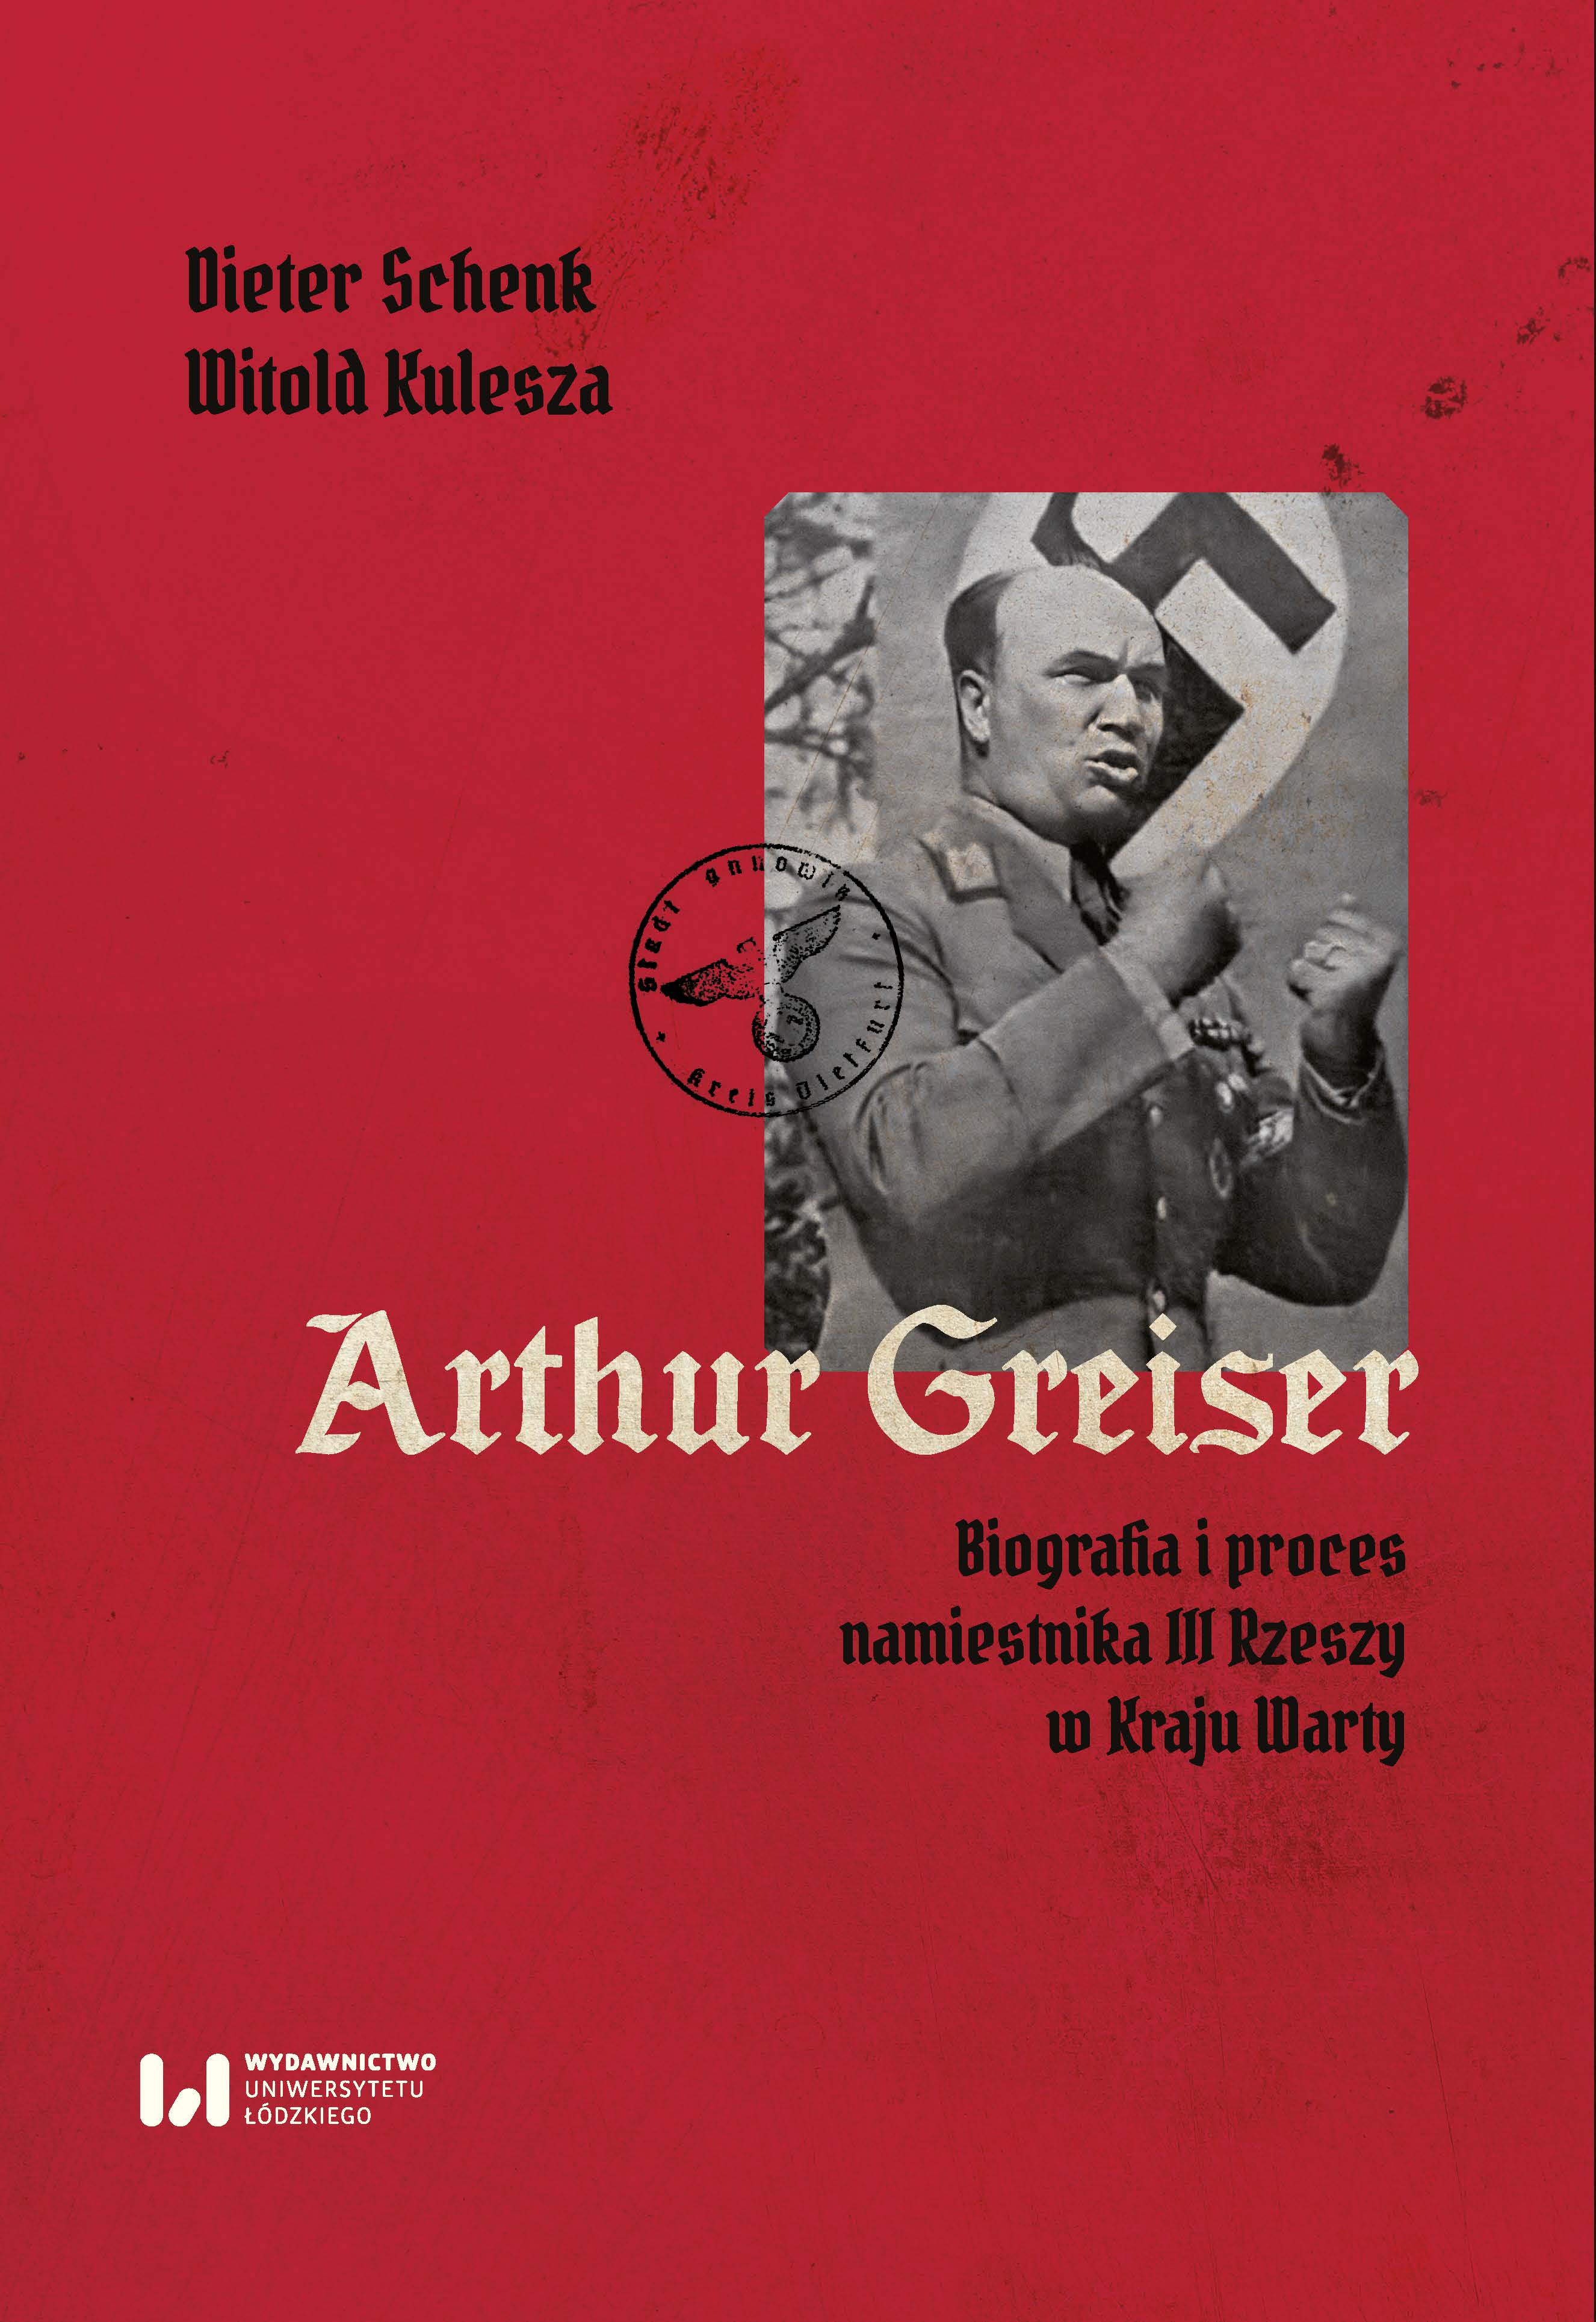 Arthur Greiser. Biography and Trial of the Governor of the Third Reich in The Reichsgau Wartheland